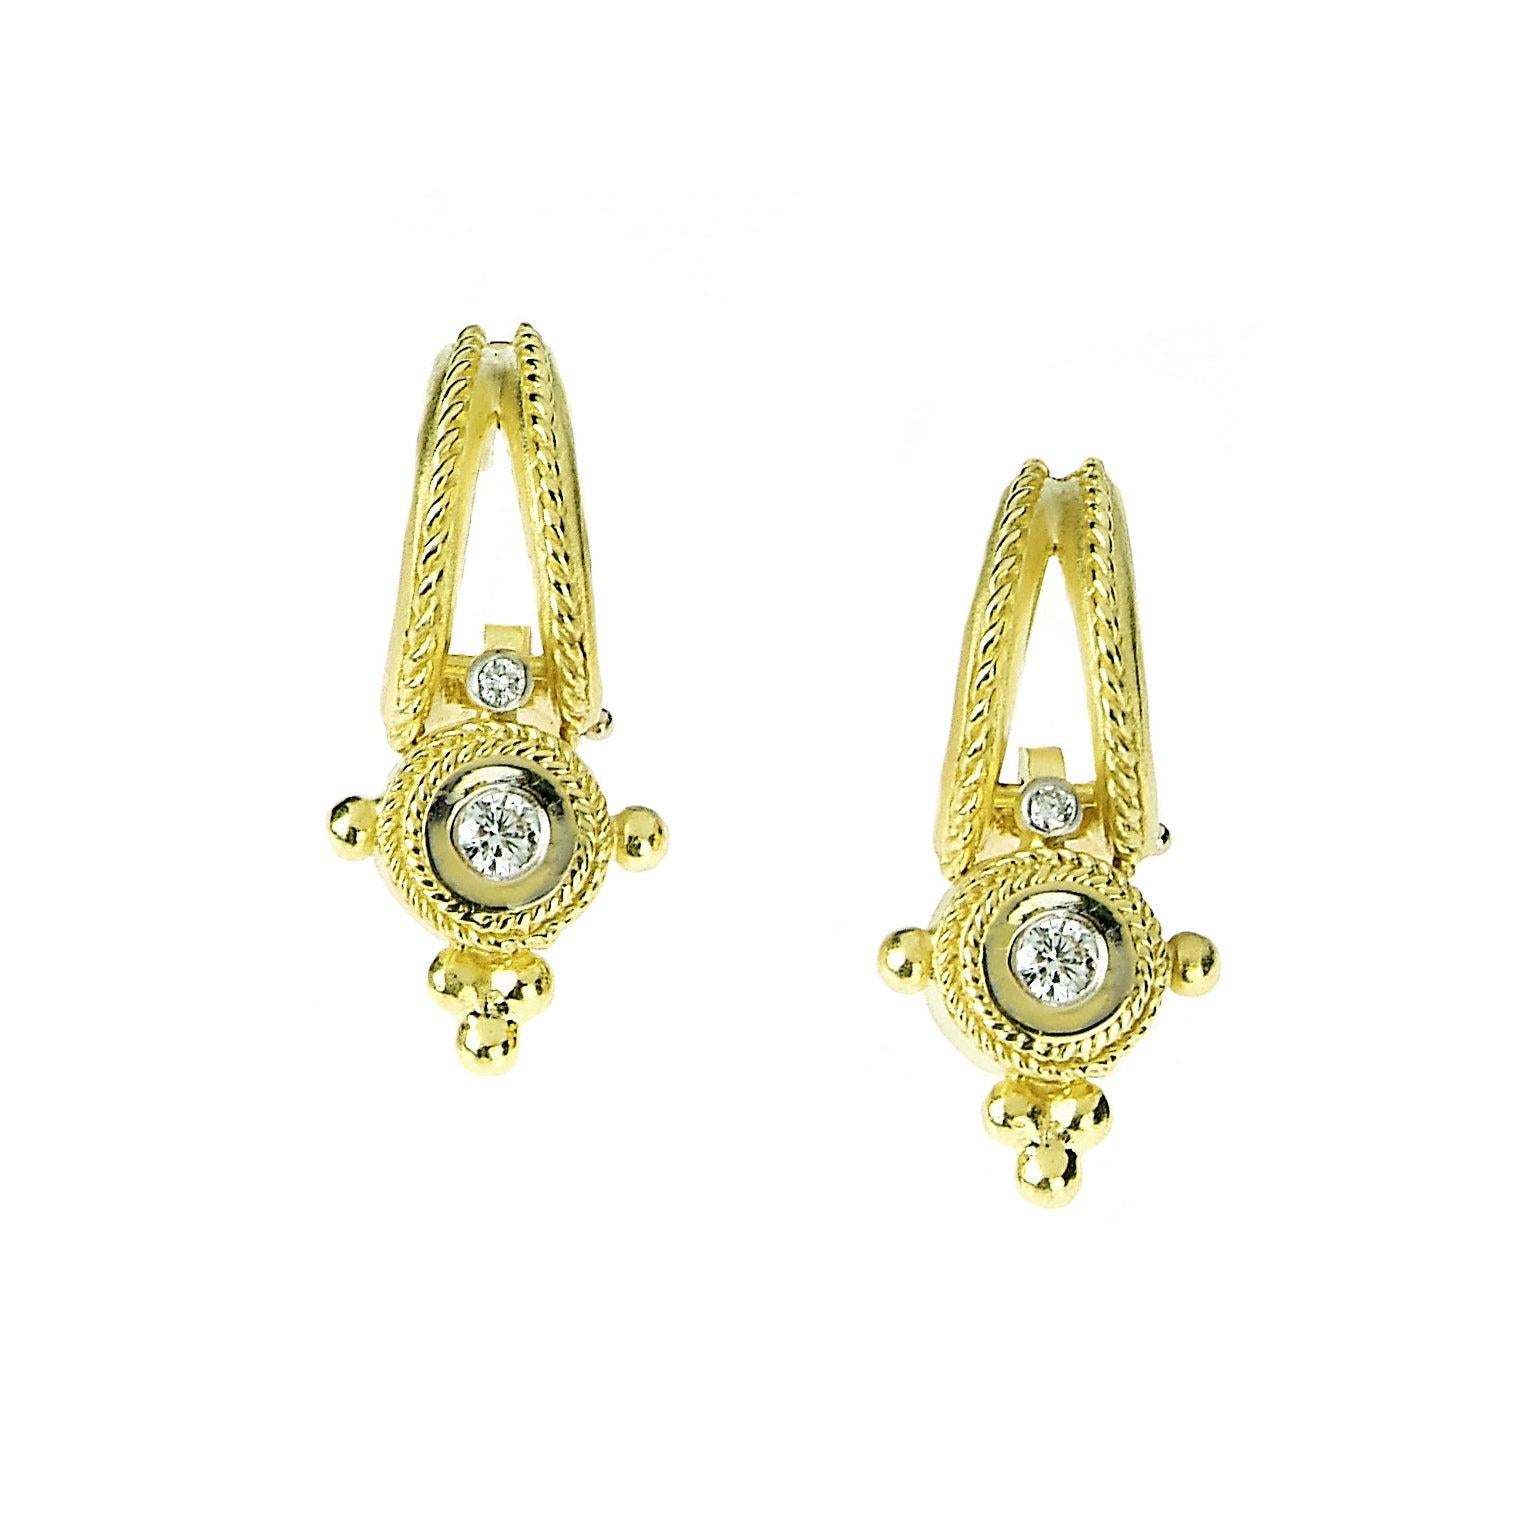 lalchand jewellers earrings designs with price